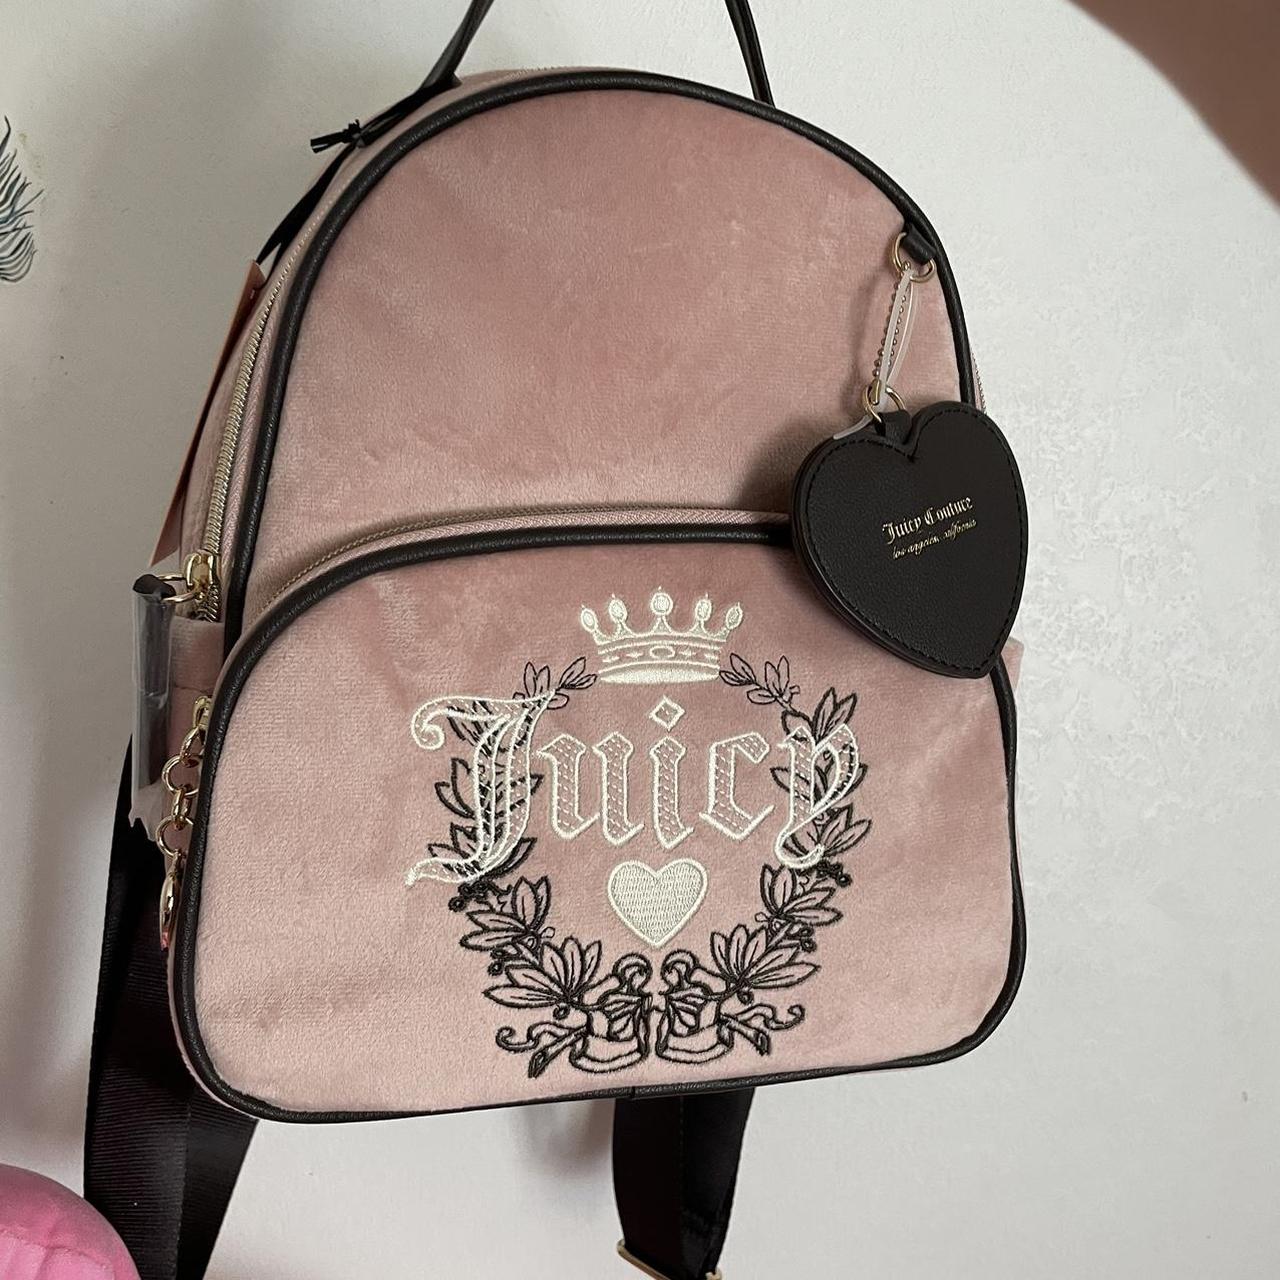 Juicy Couture Signature Backpack Top carry strap for - Depop